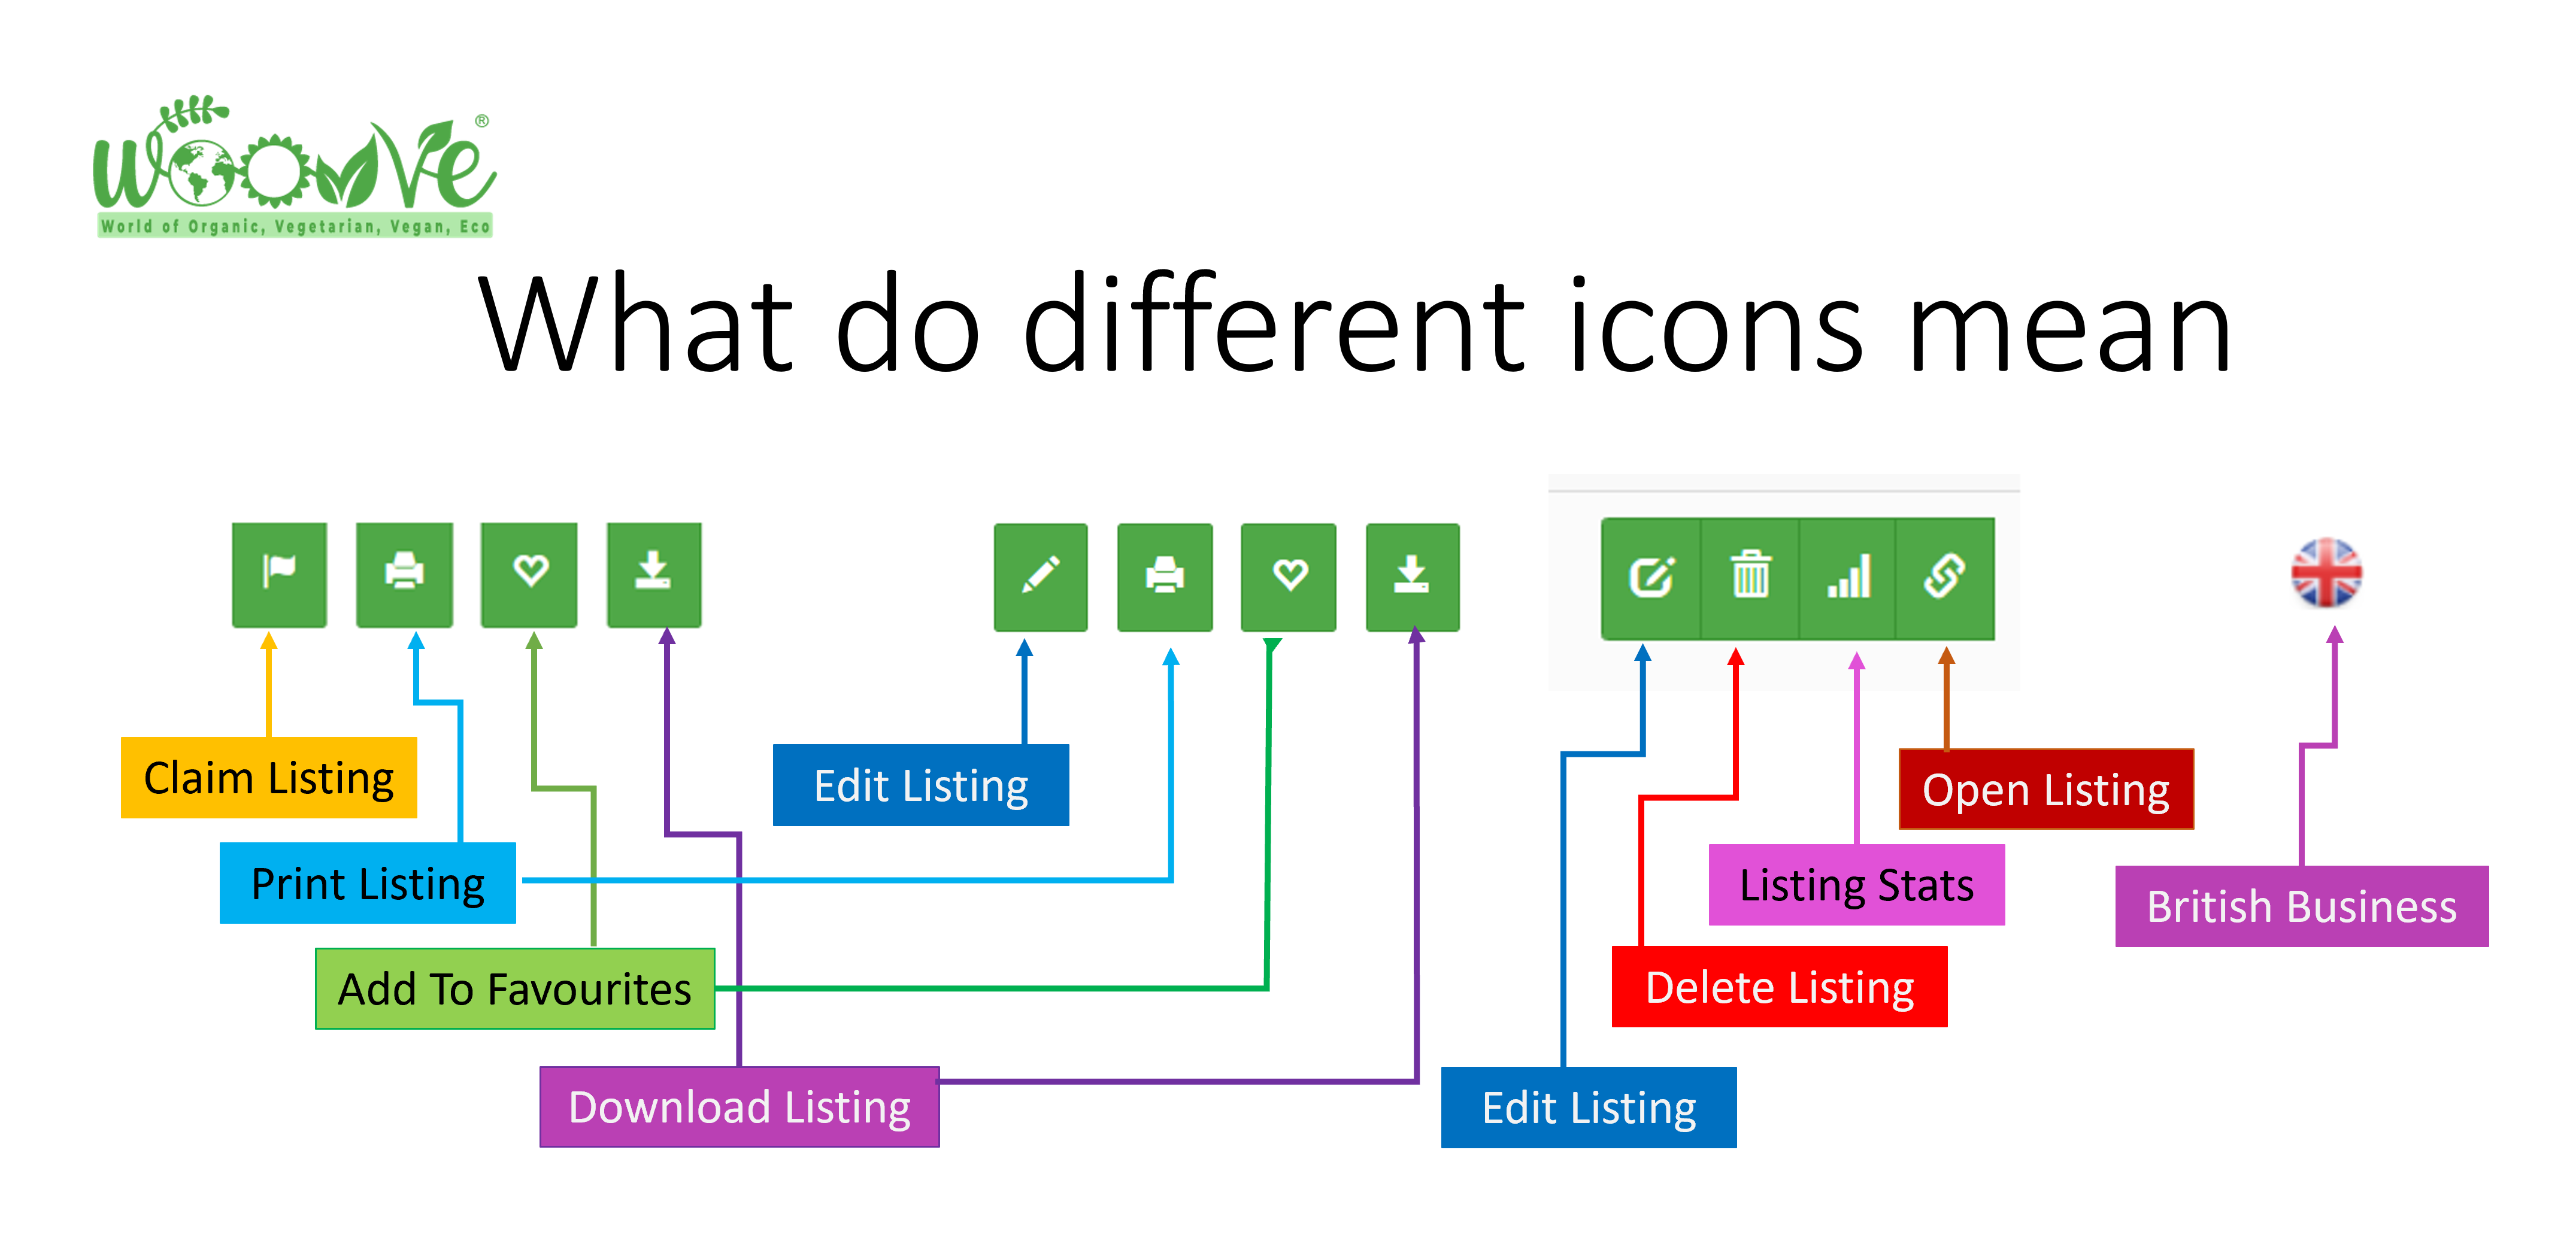 WOOVVE Listing icons